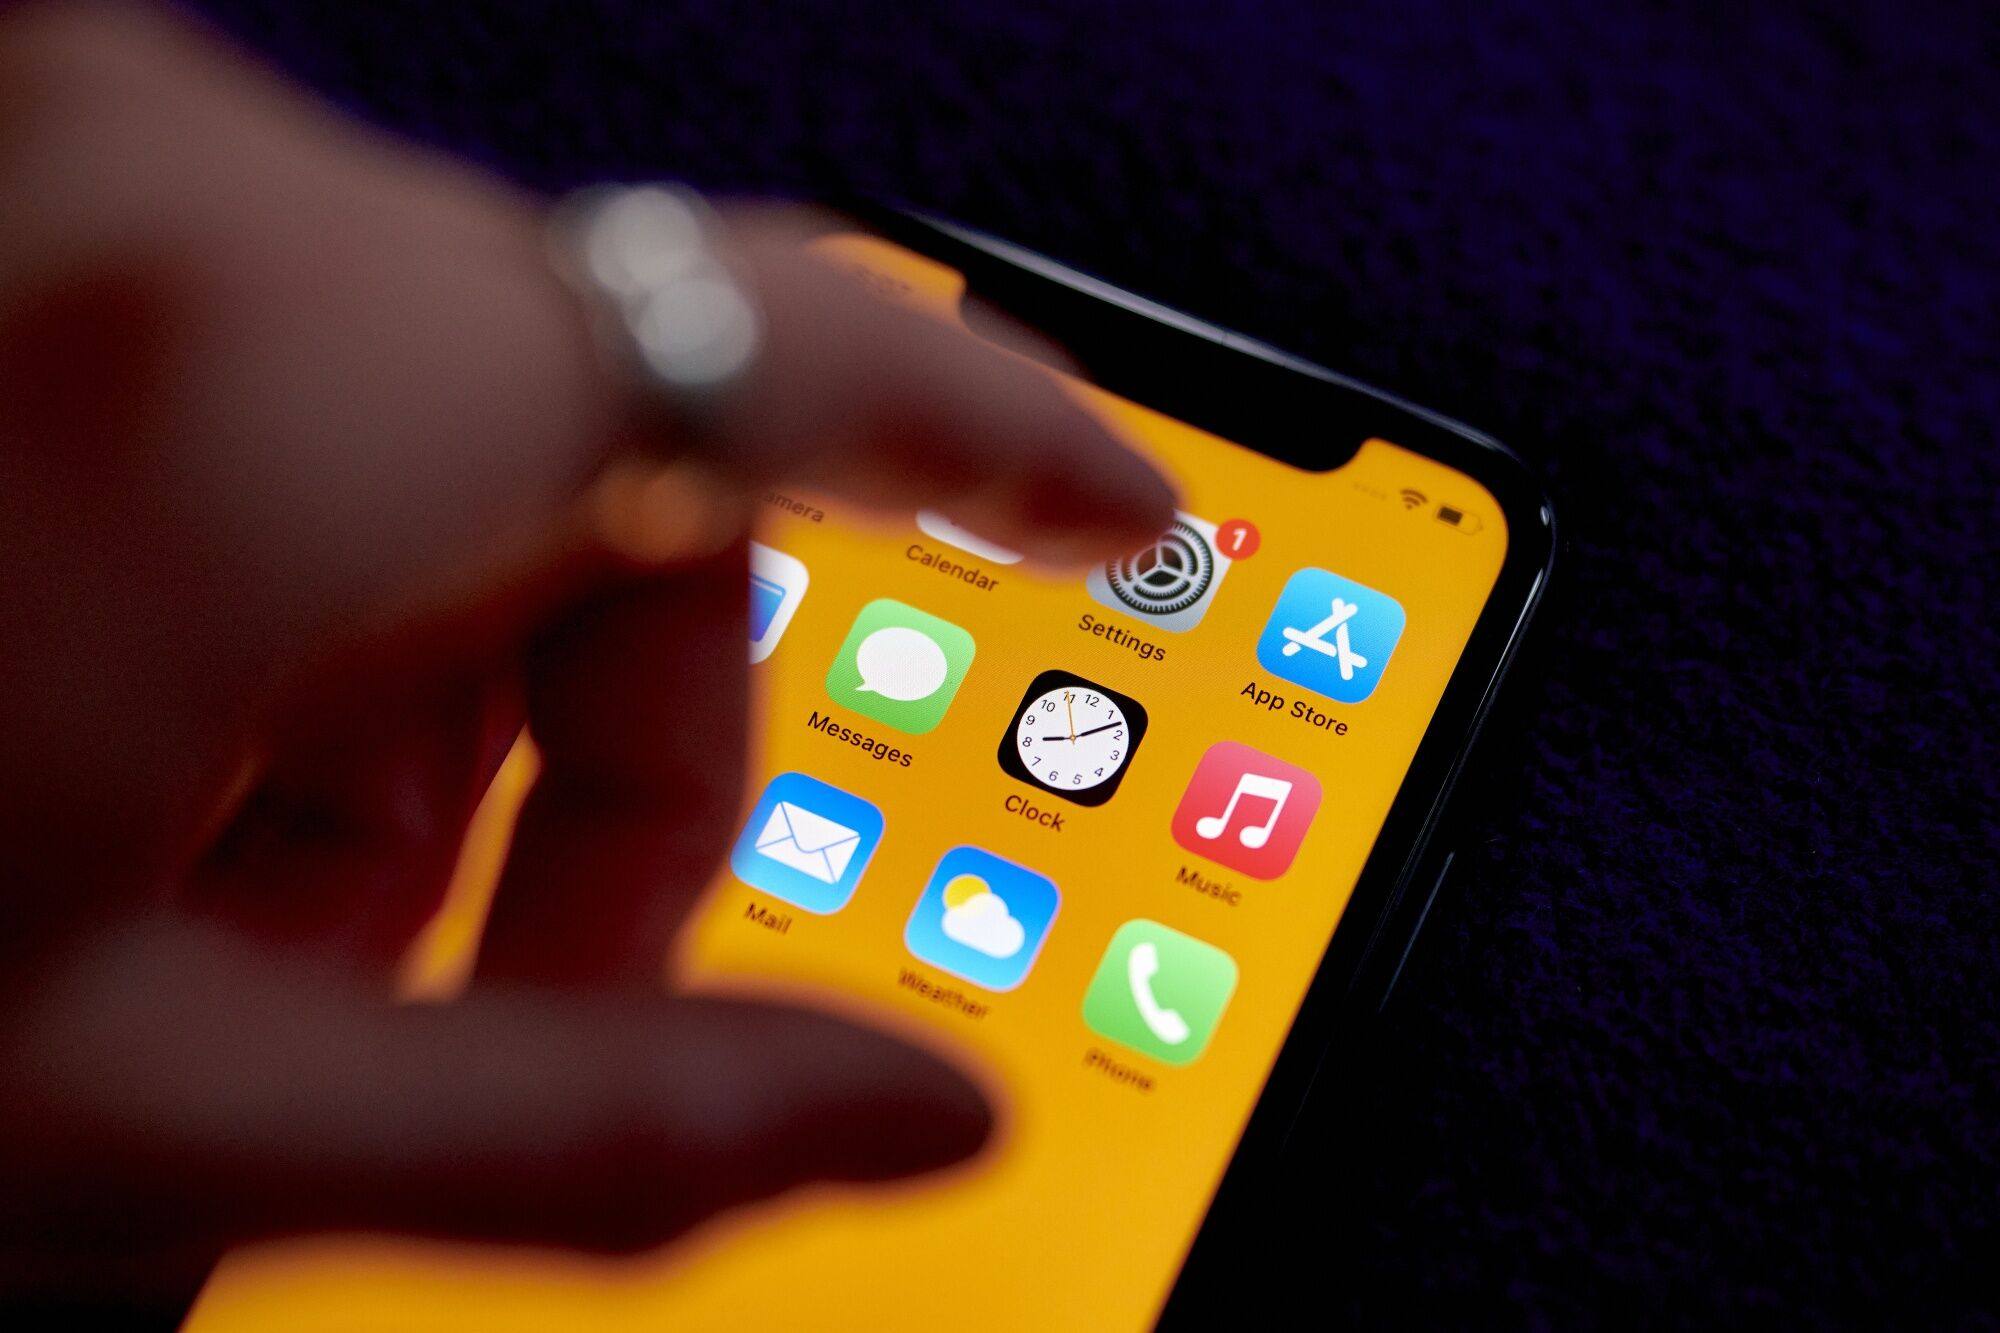 Employees with iPhones in some Chinese ministries have until the end of this month to switch to other phone brands for work use, according sources. Photo: Bloomberg